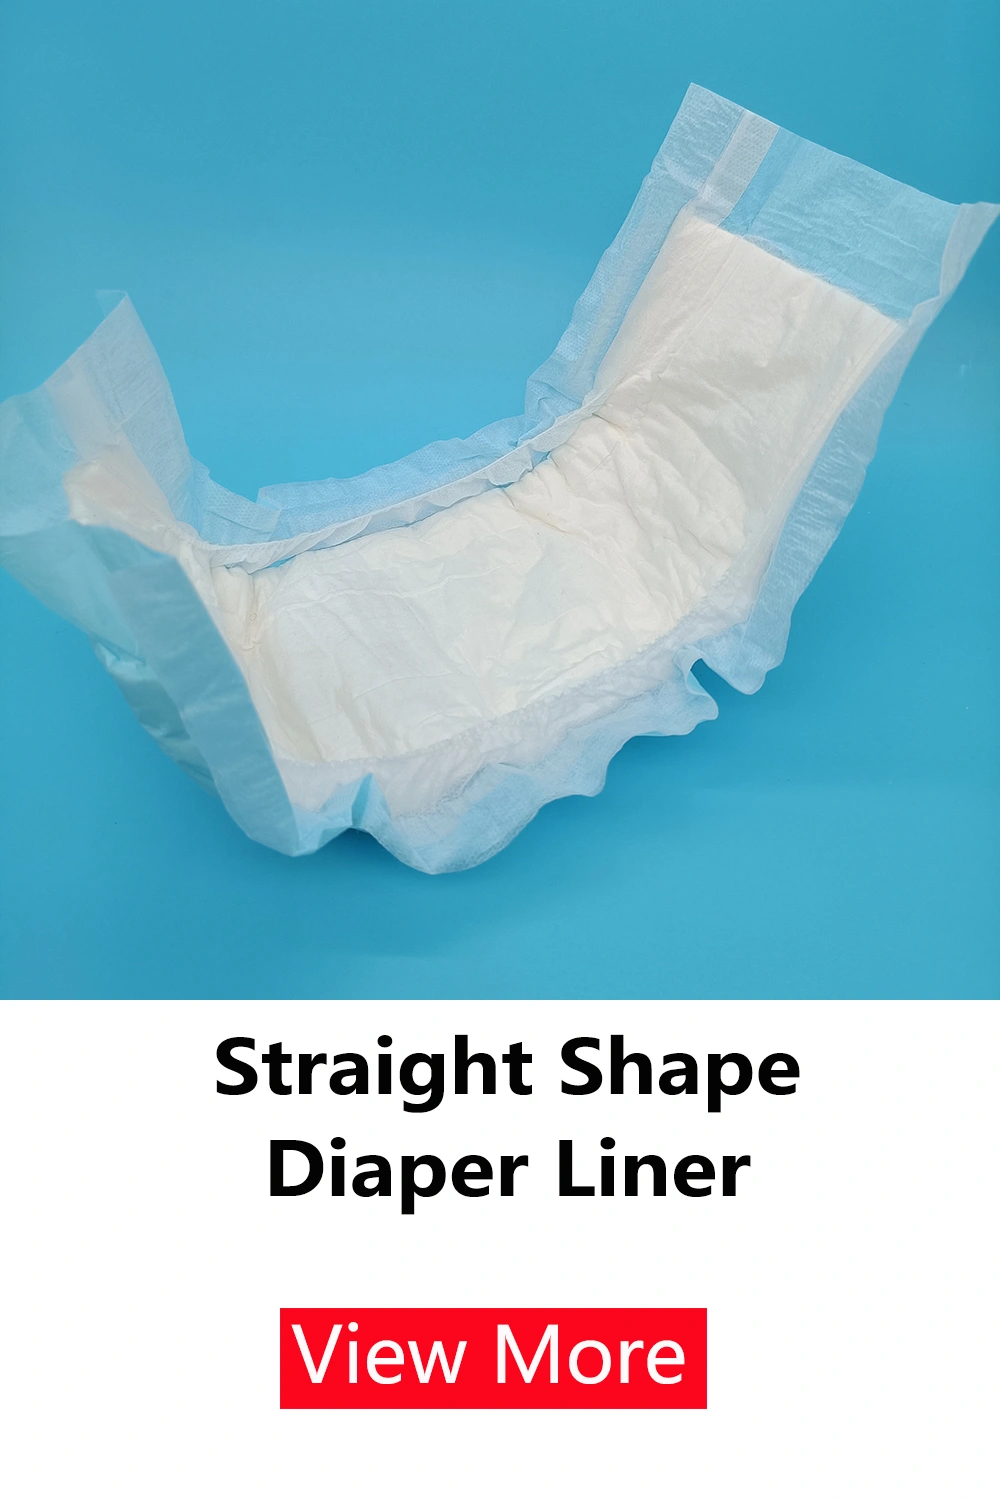 Waterproof Pet Pad and straight shape diaper liner picture